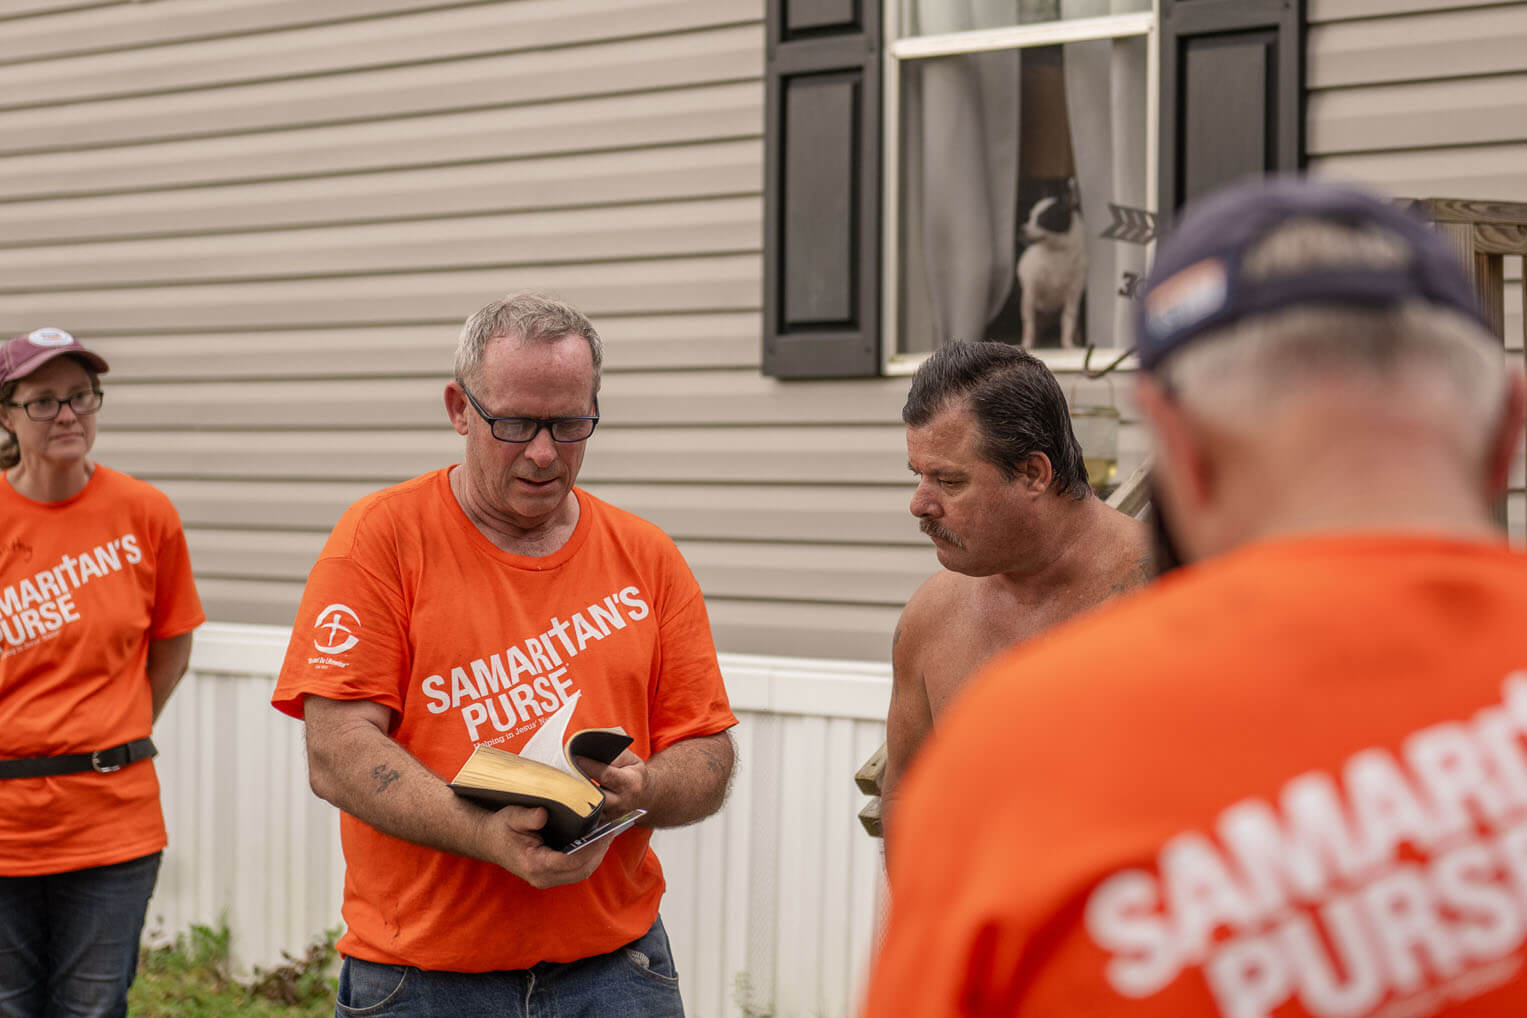 Samaritan's Purse volunteers present a Billy Graham Study Bible, signed by each volunteer, to homeowner Kevin who was trapped for days after the storm.